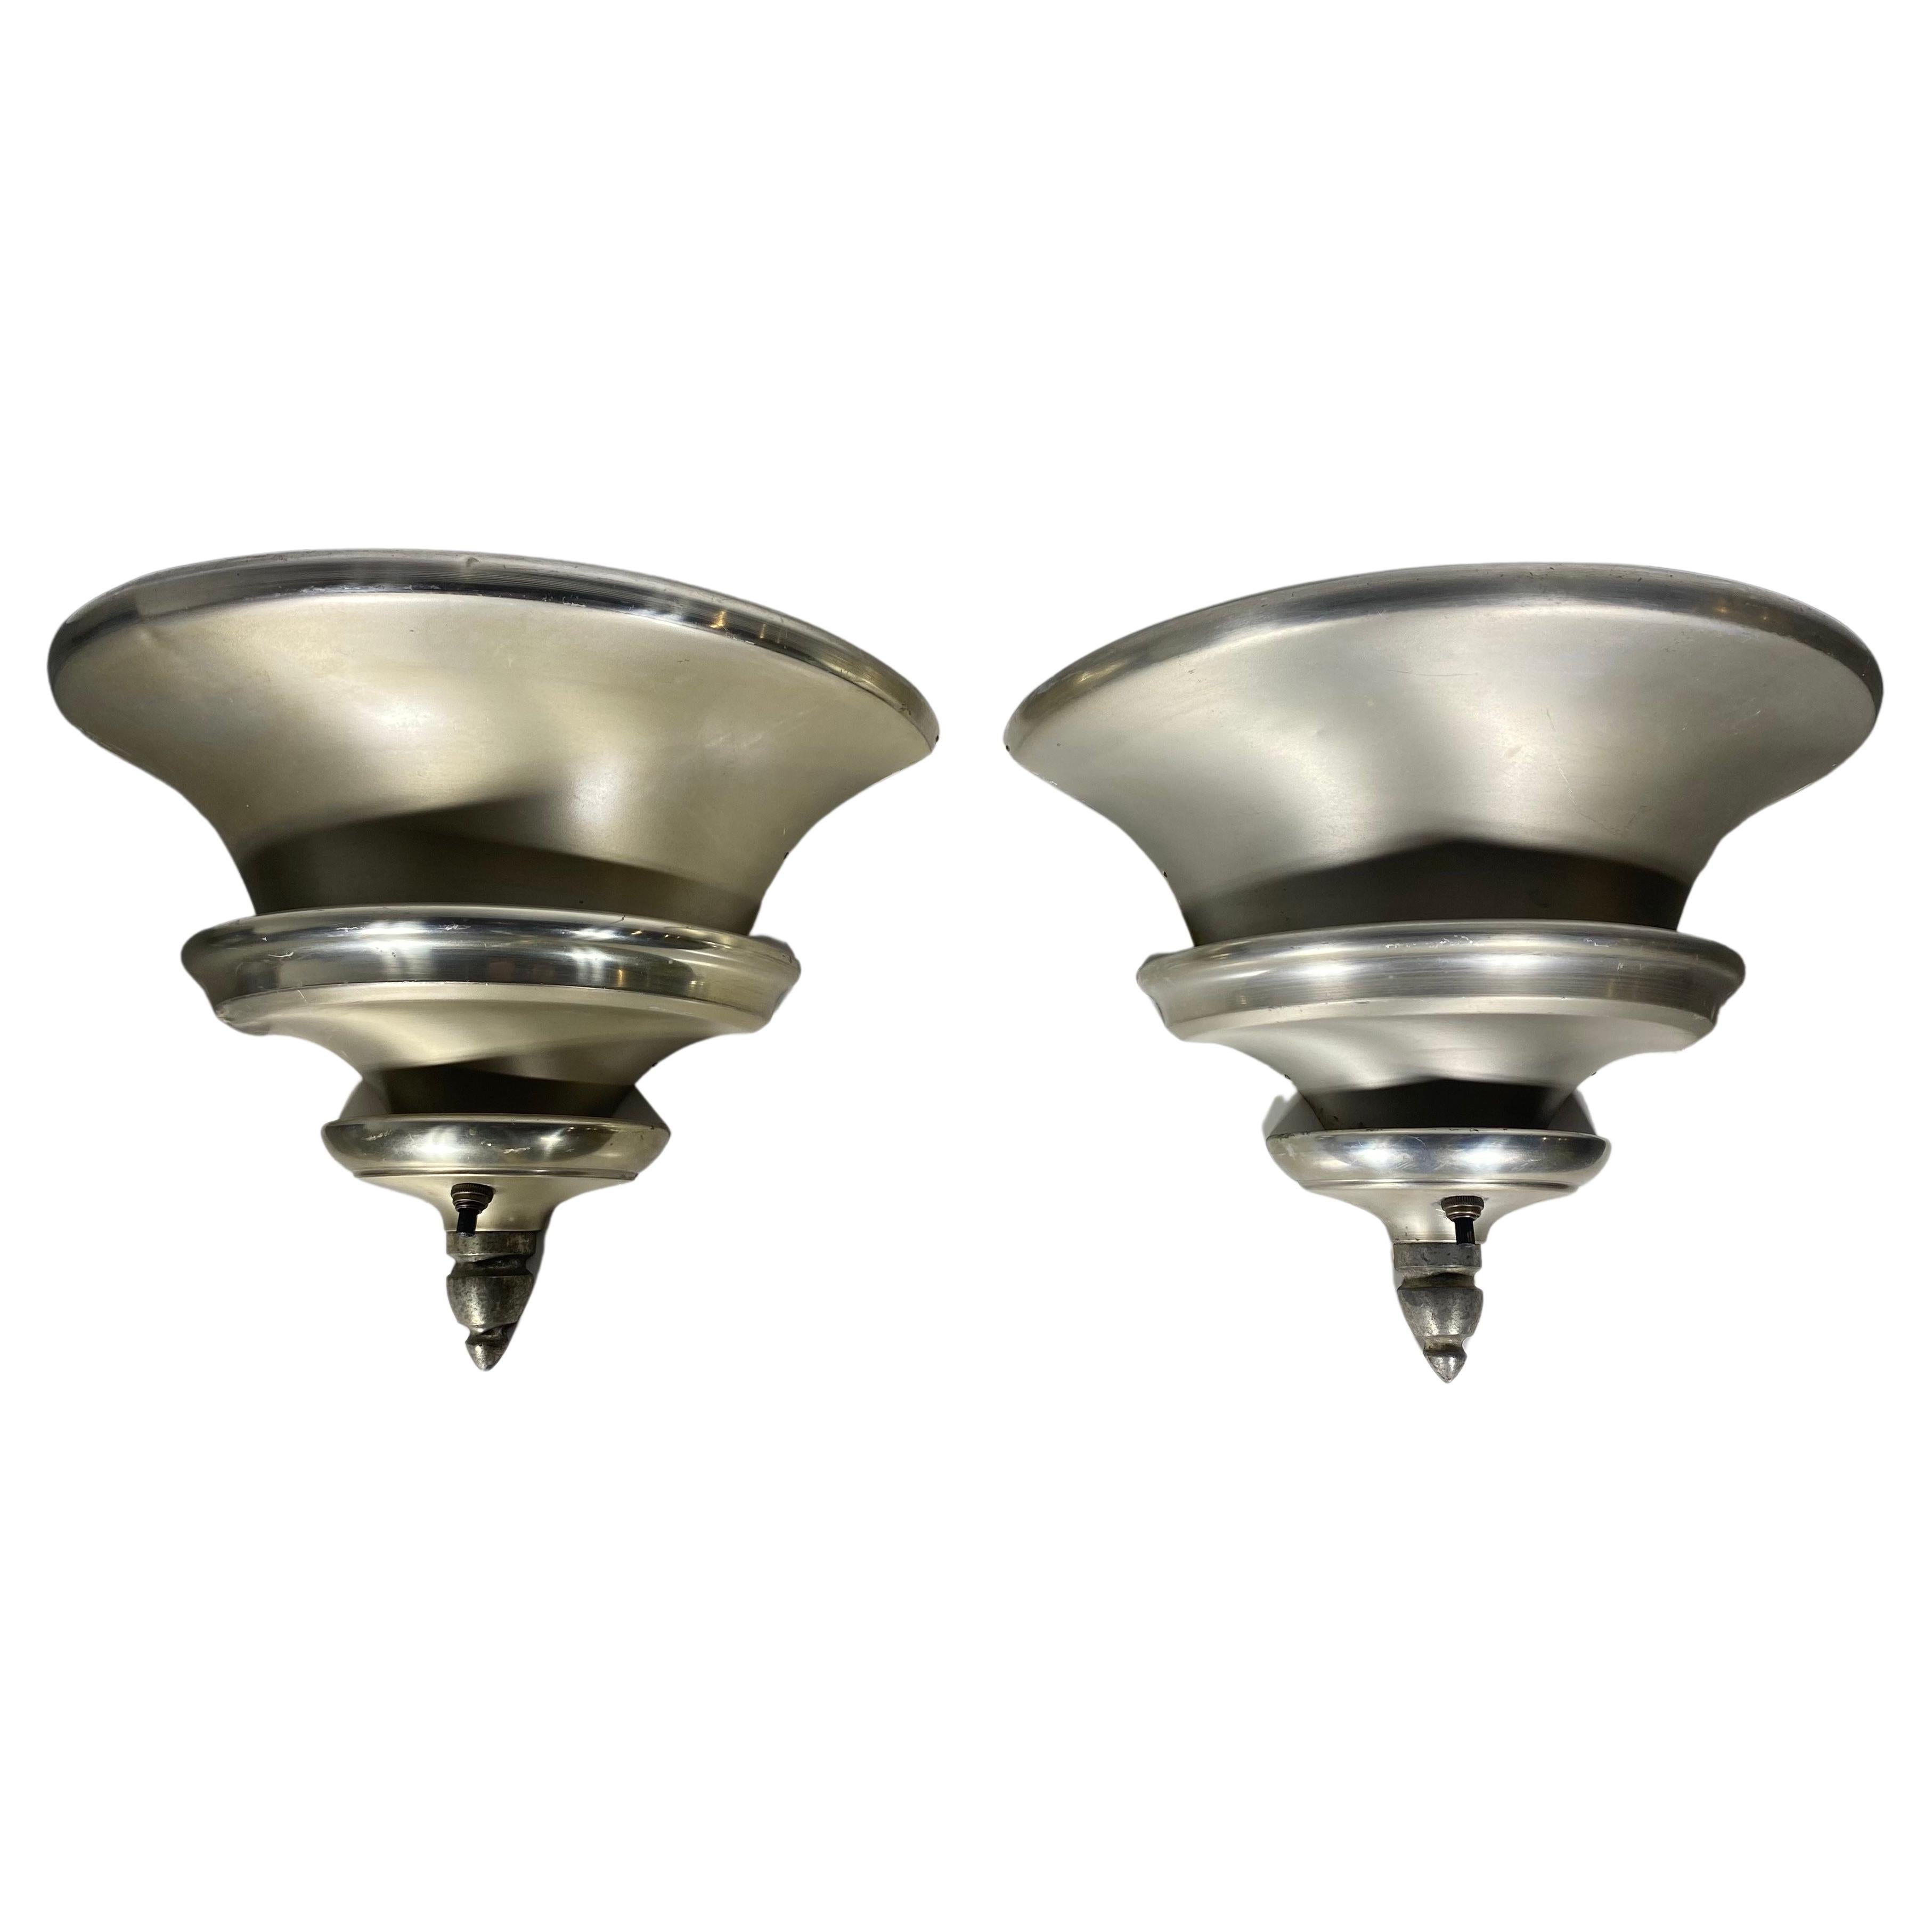 Brushed Aluminum Art Deco Demilune Wall Sconces by Walter Von Nessen, Pair For Sale